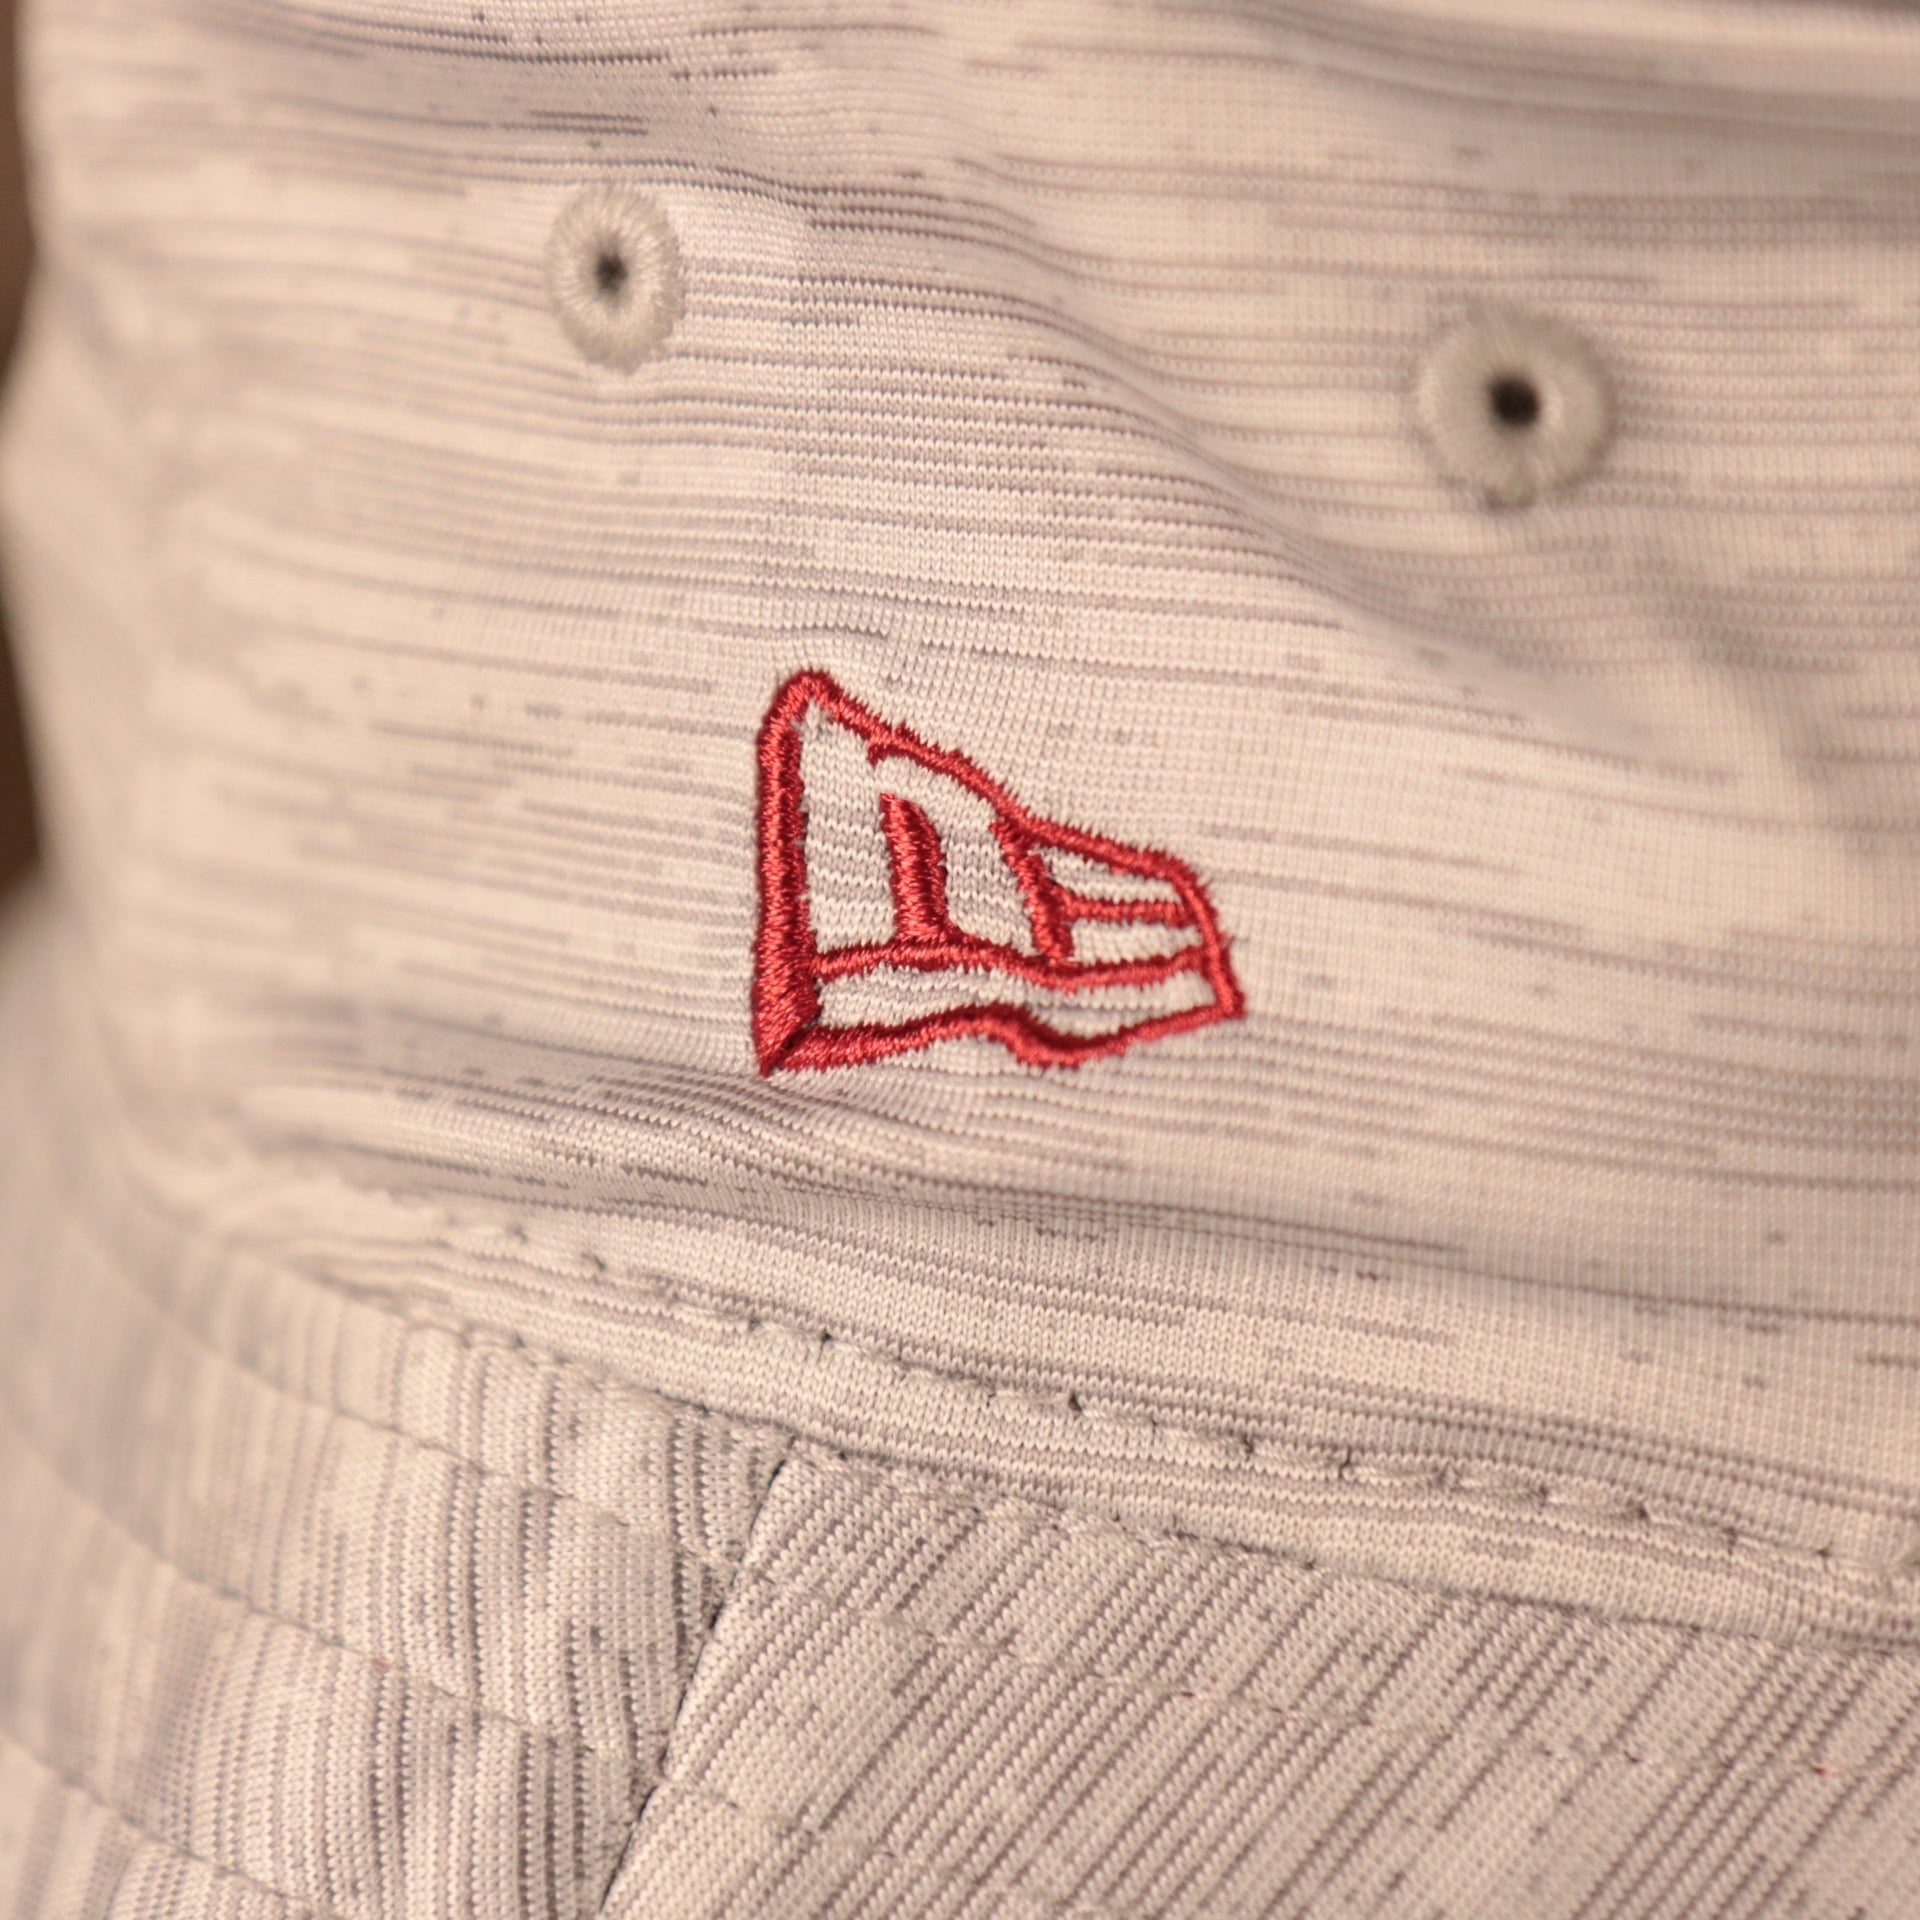 The New era patch on the side of gray 2021 nfl training arizona cardinals bucket hat.